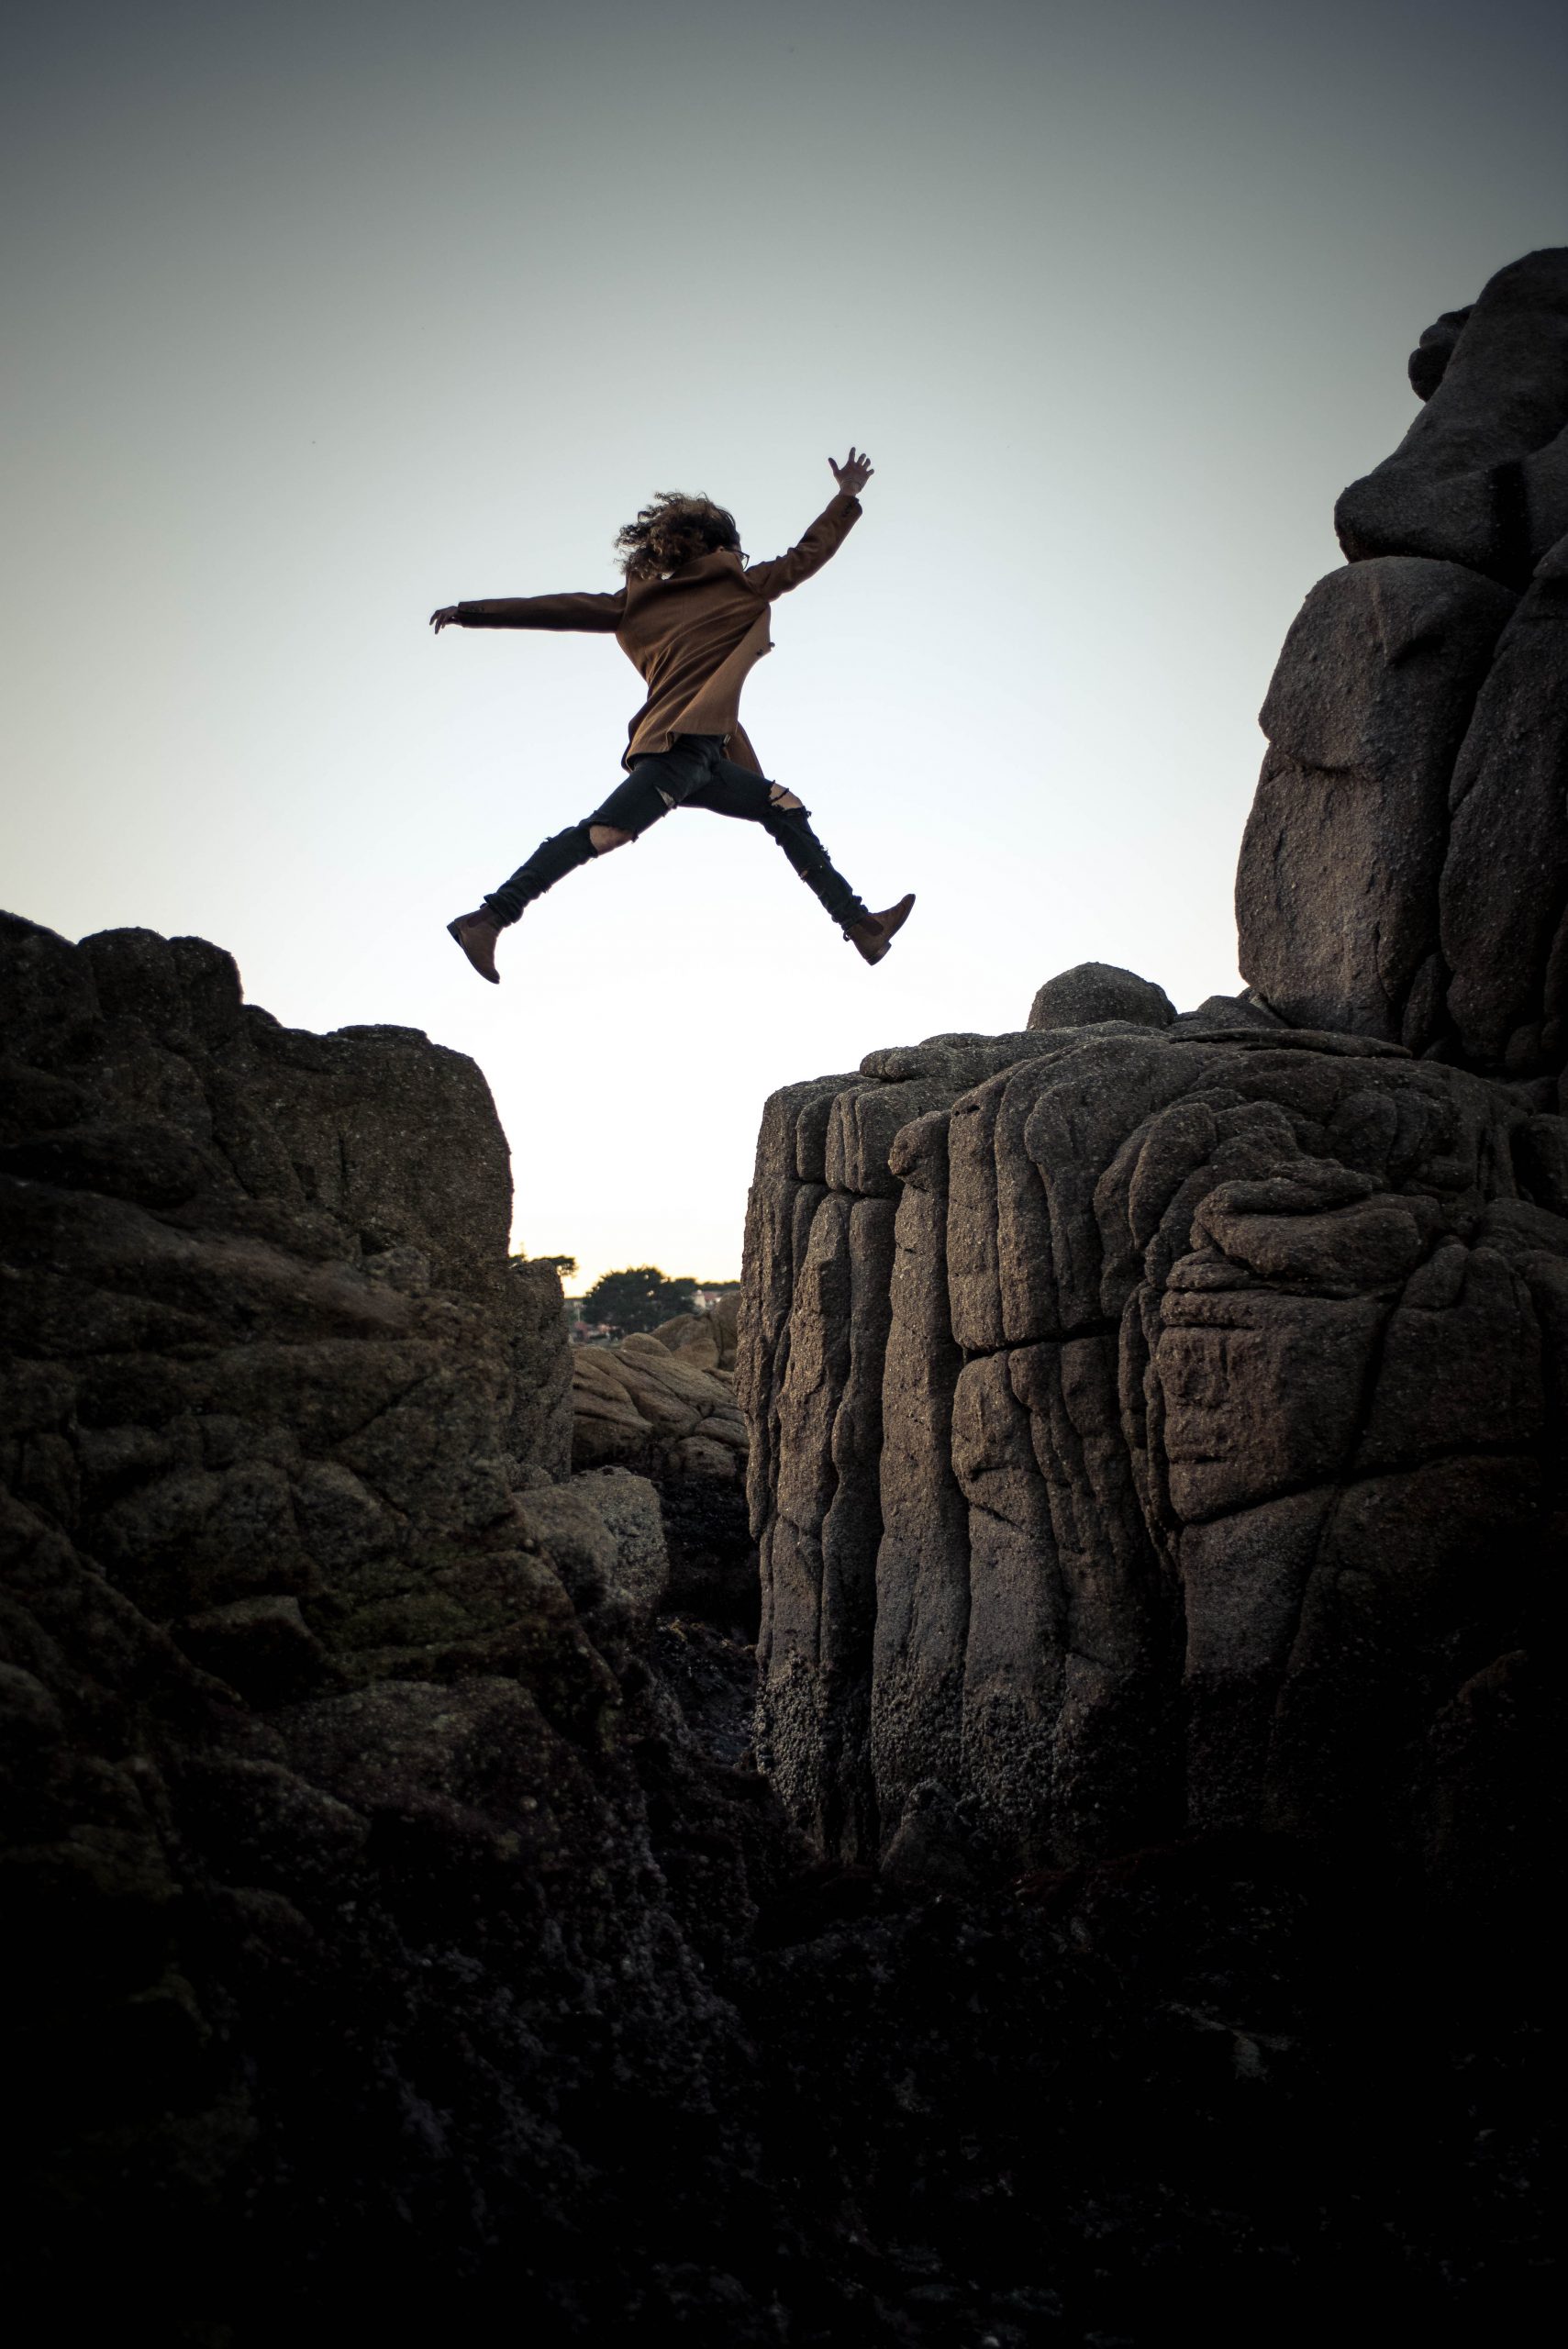 10 Fearless Ways to Overcome Fear